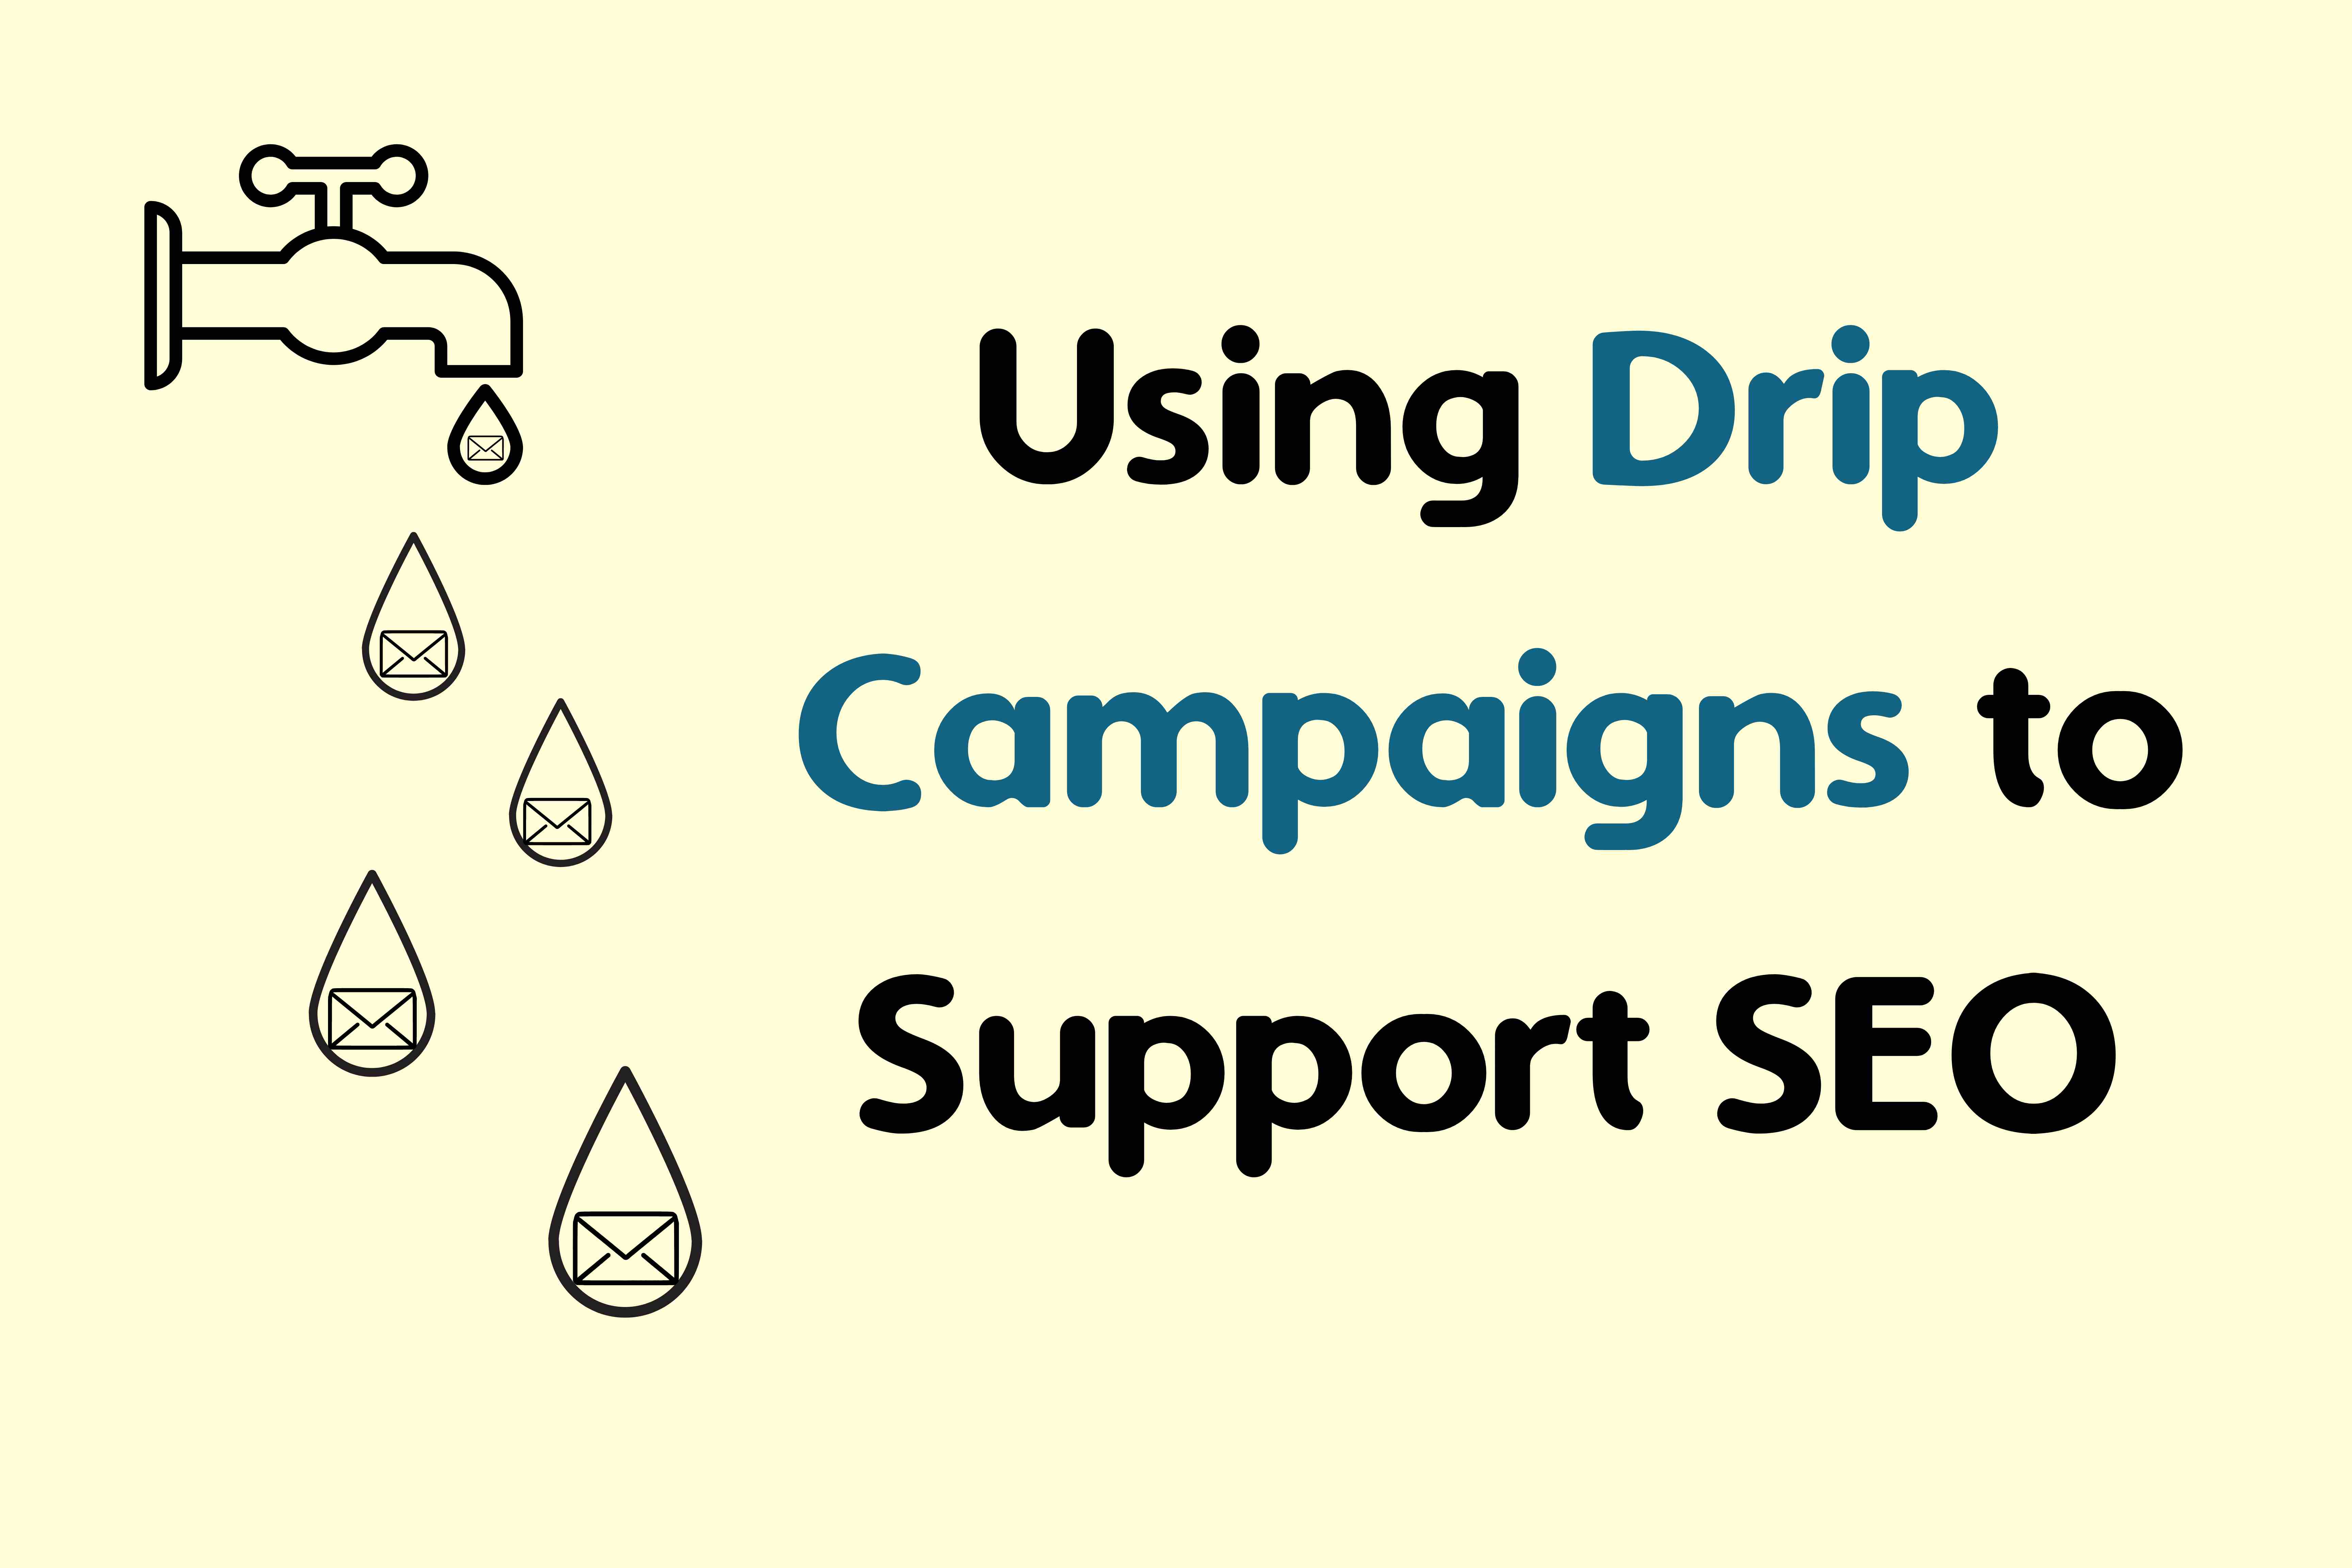 Using Drip Campaigns to Support SEO